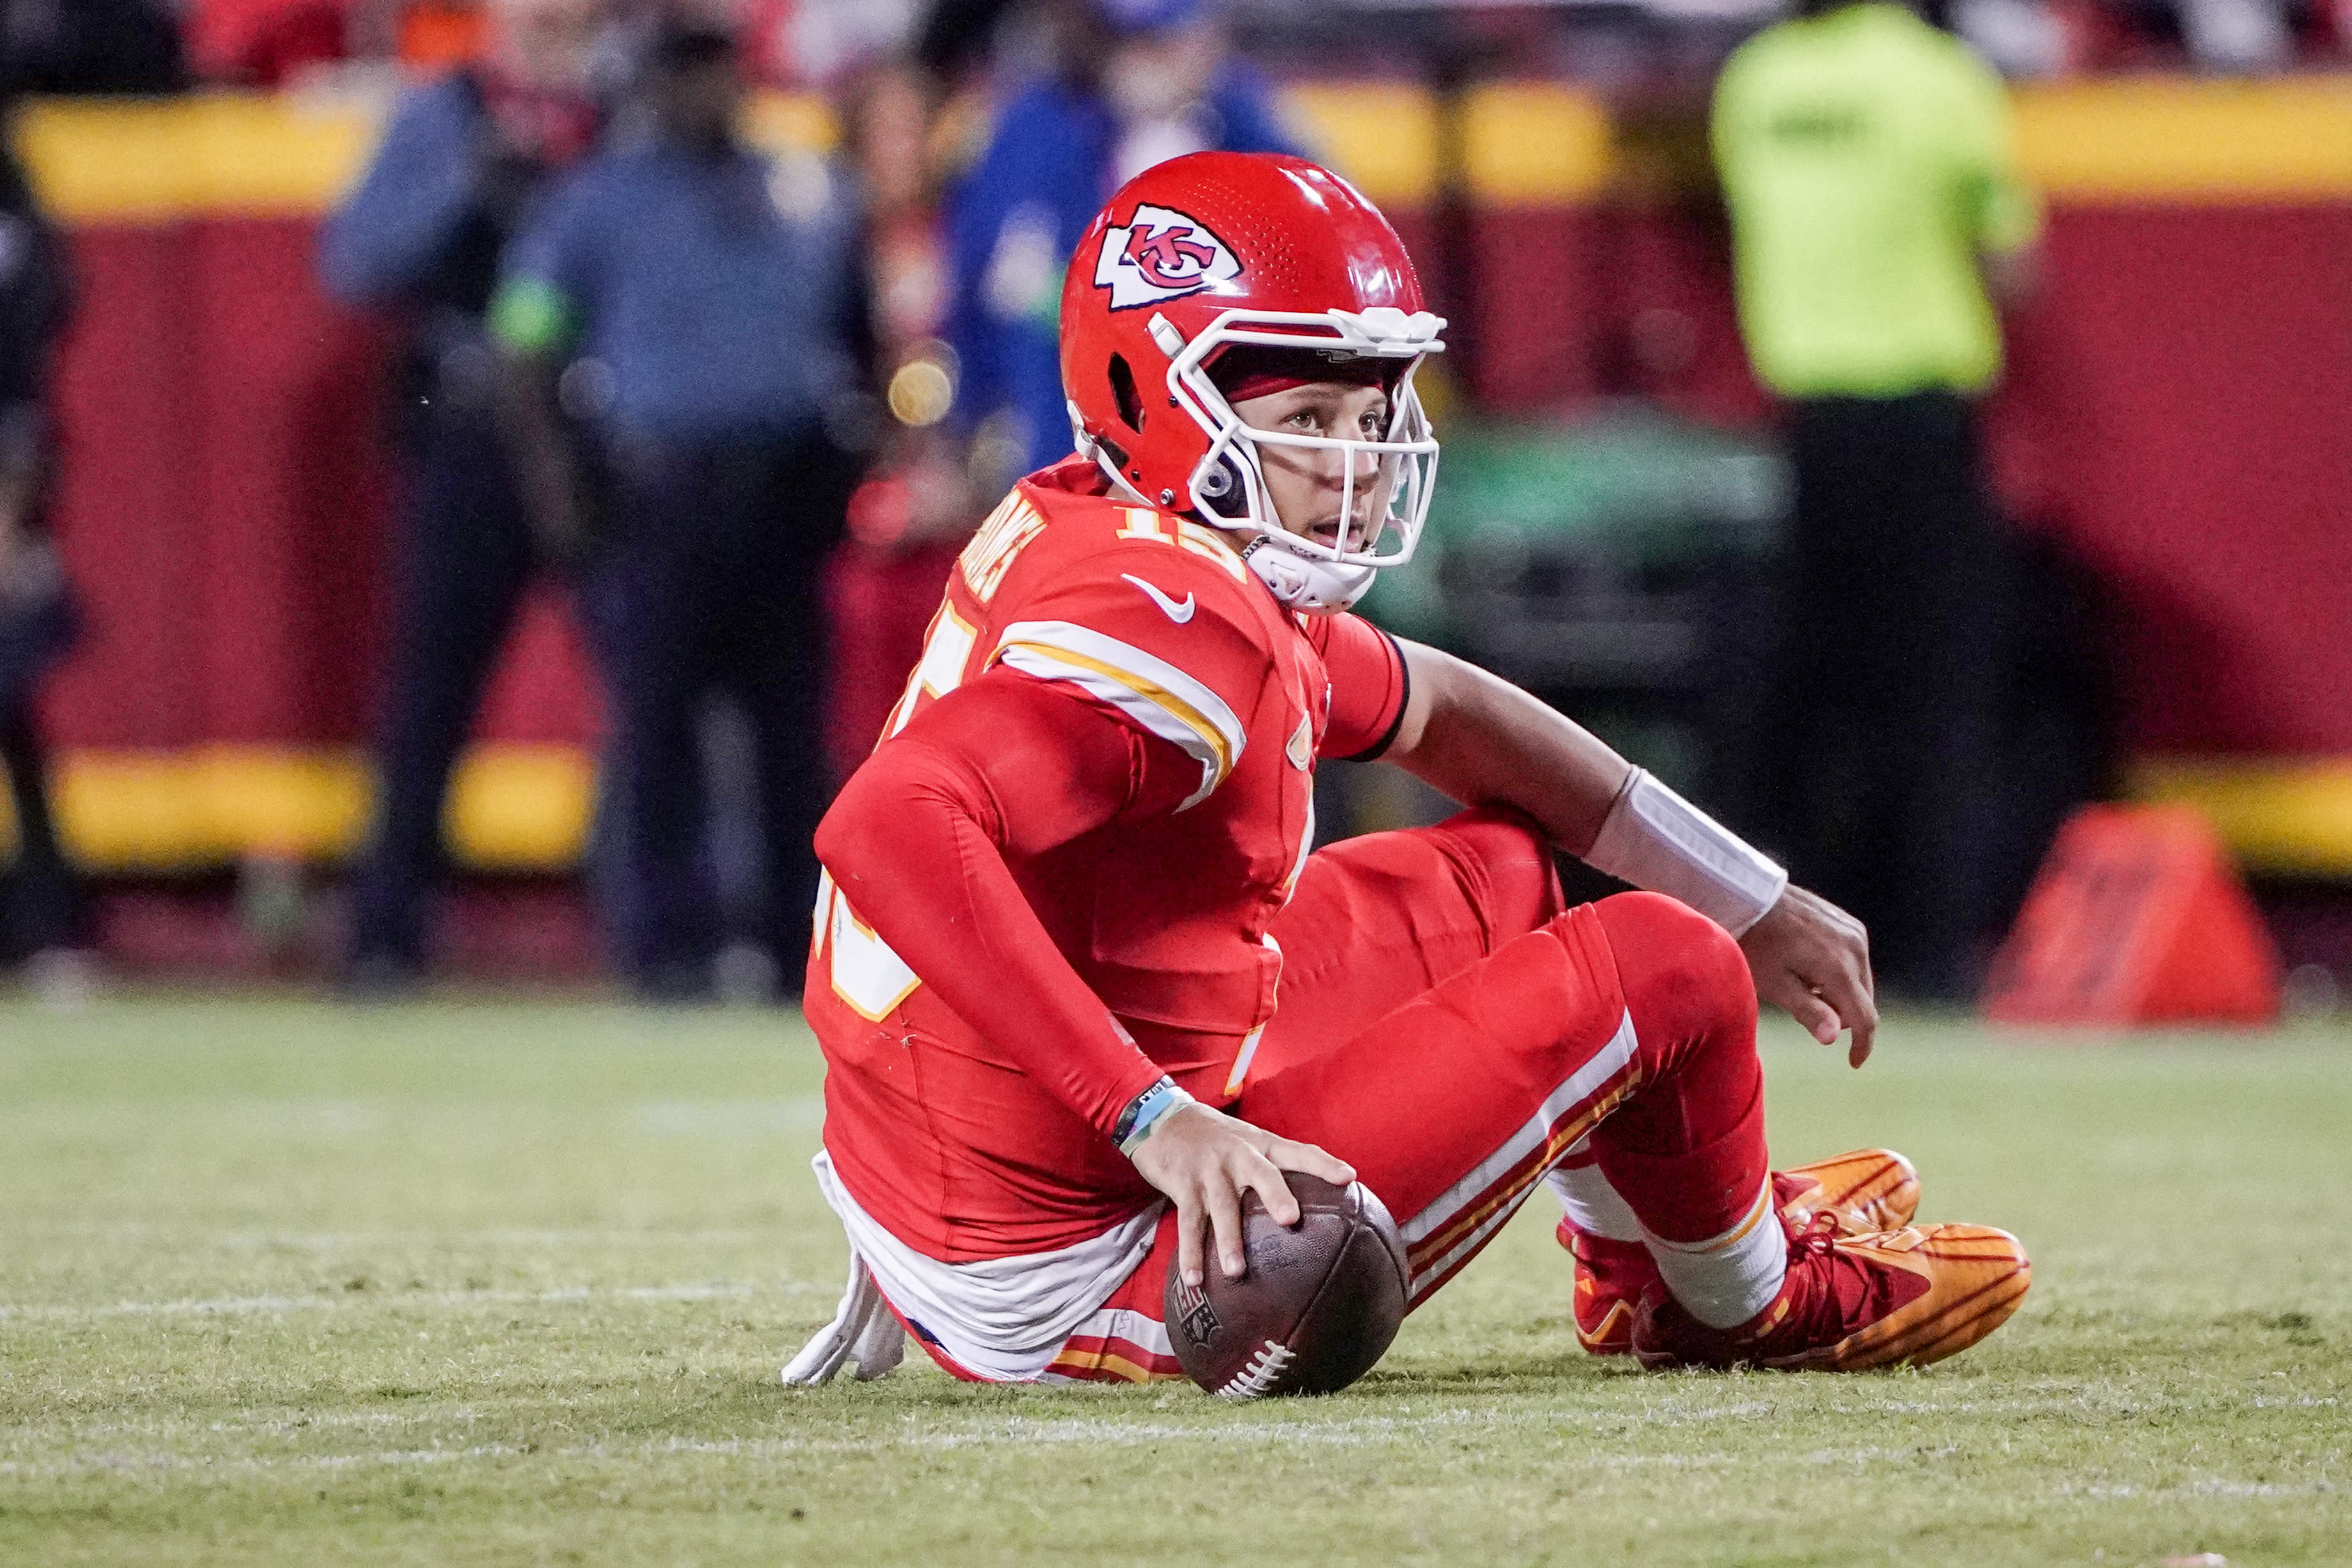 The Chiefs have learned to lean on their defense when their